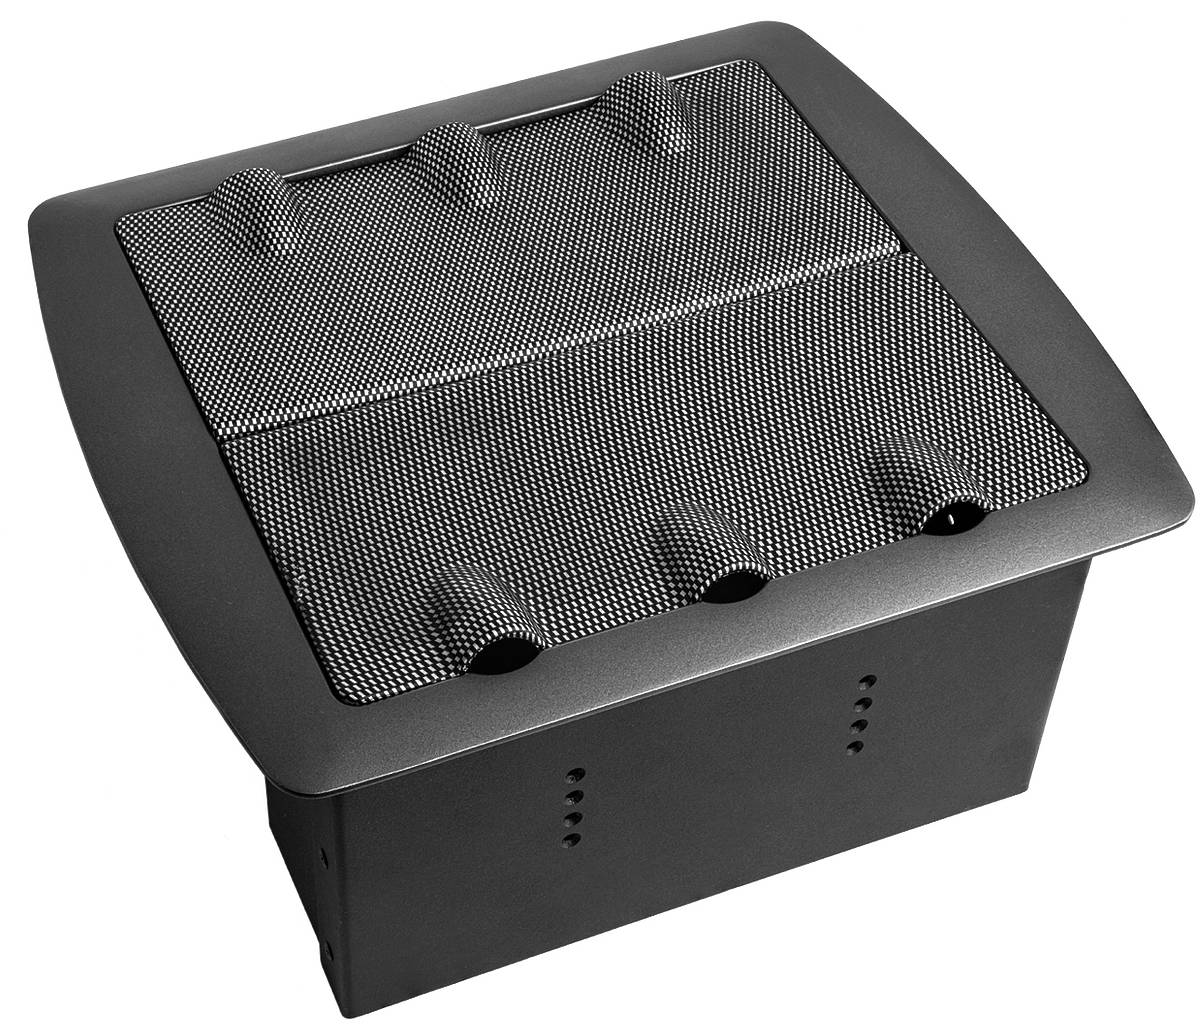 Kramer TBUS-20XL WAVES Table Mount Modular Multi-Connection Solution - Tilt-up Lid, 217×230mm cutout product image. Click to enlarge.